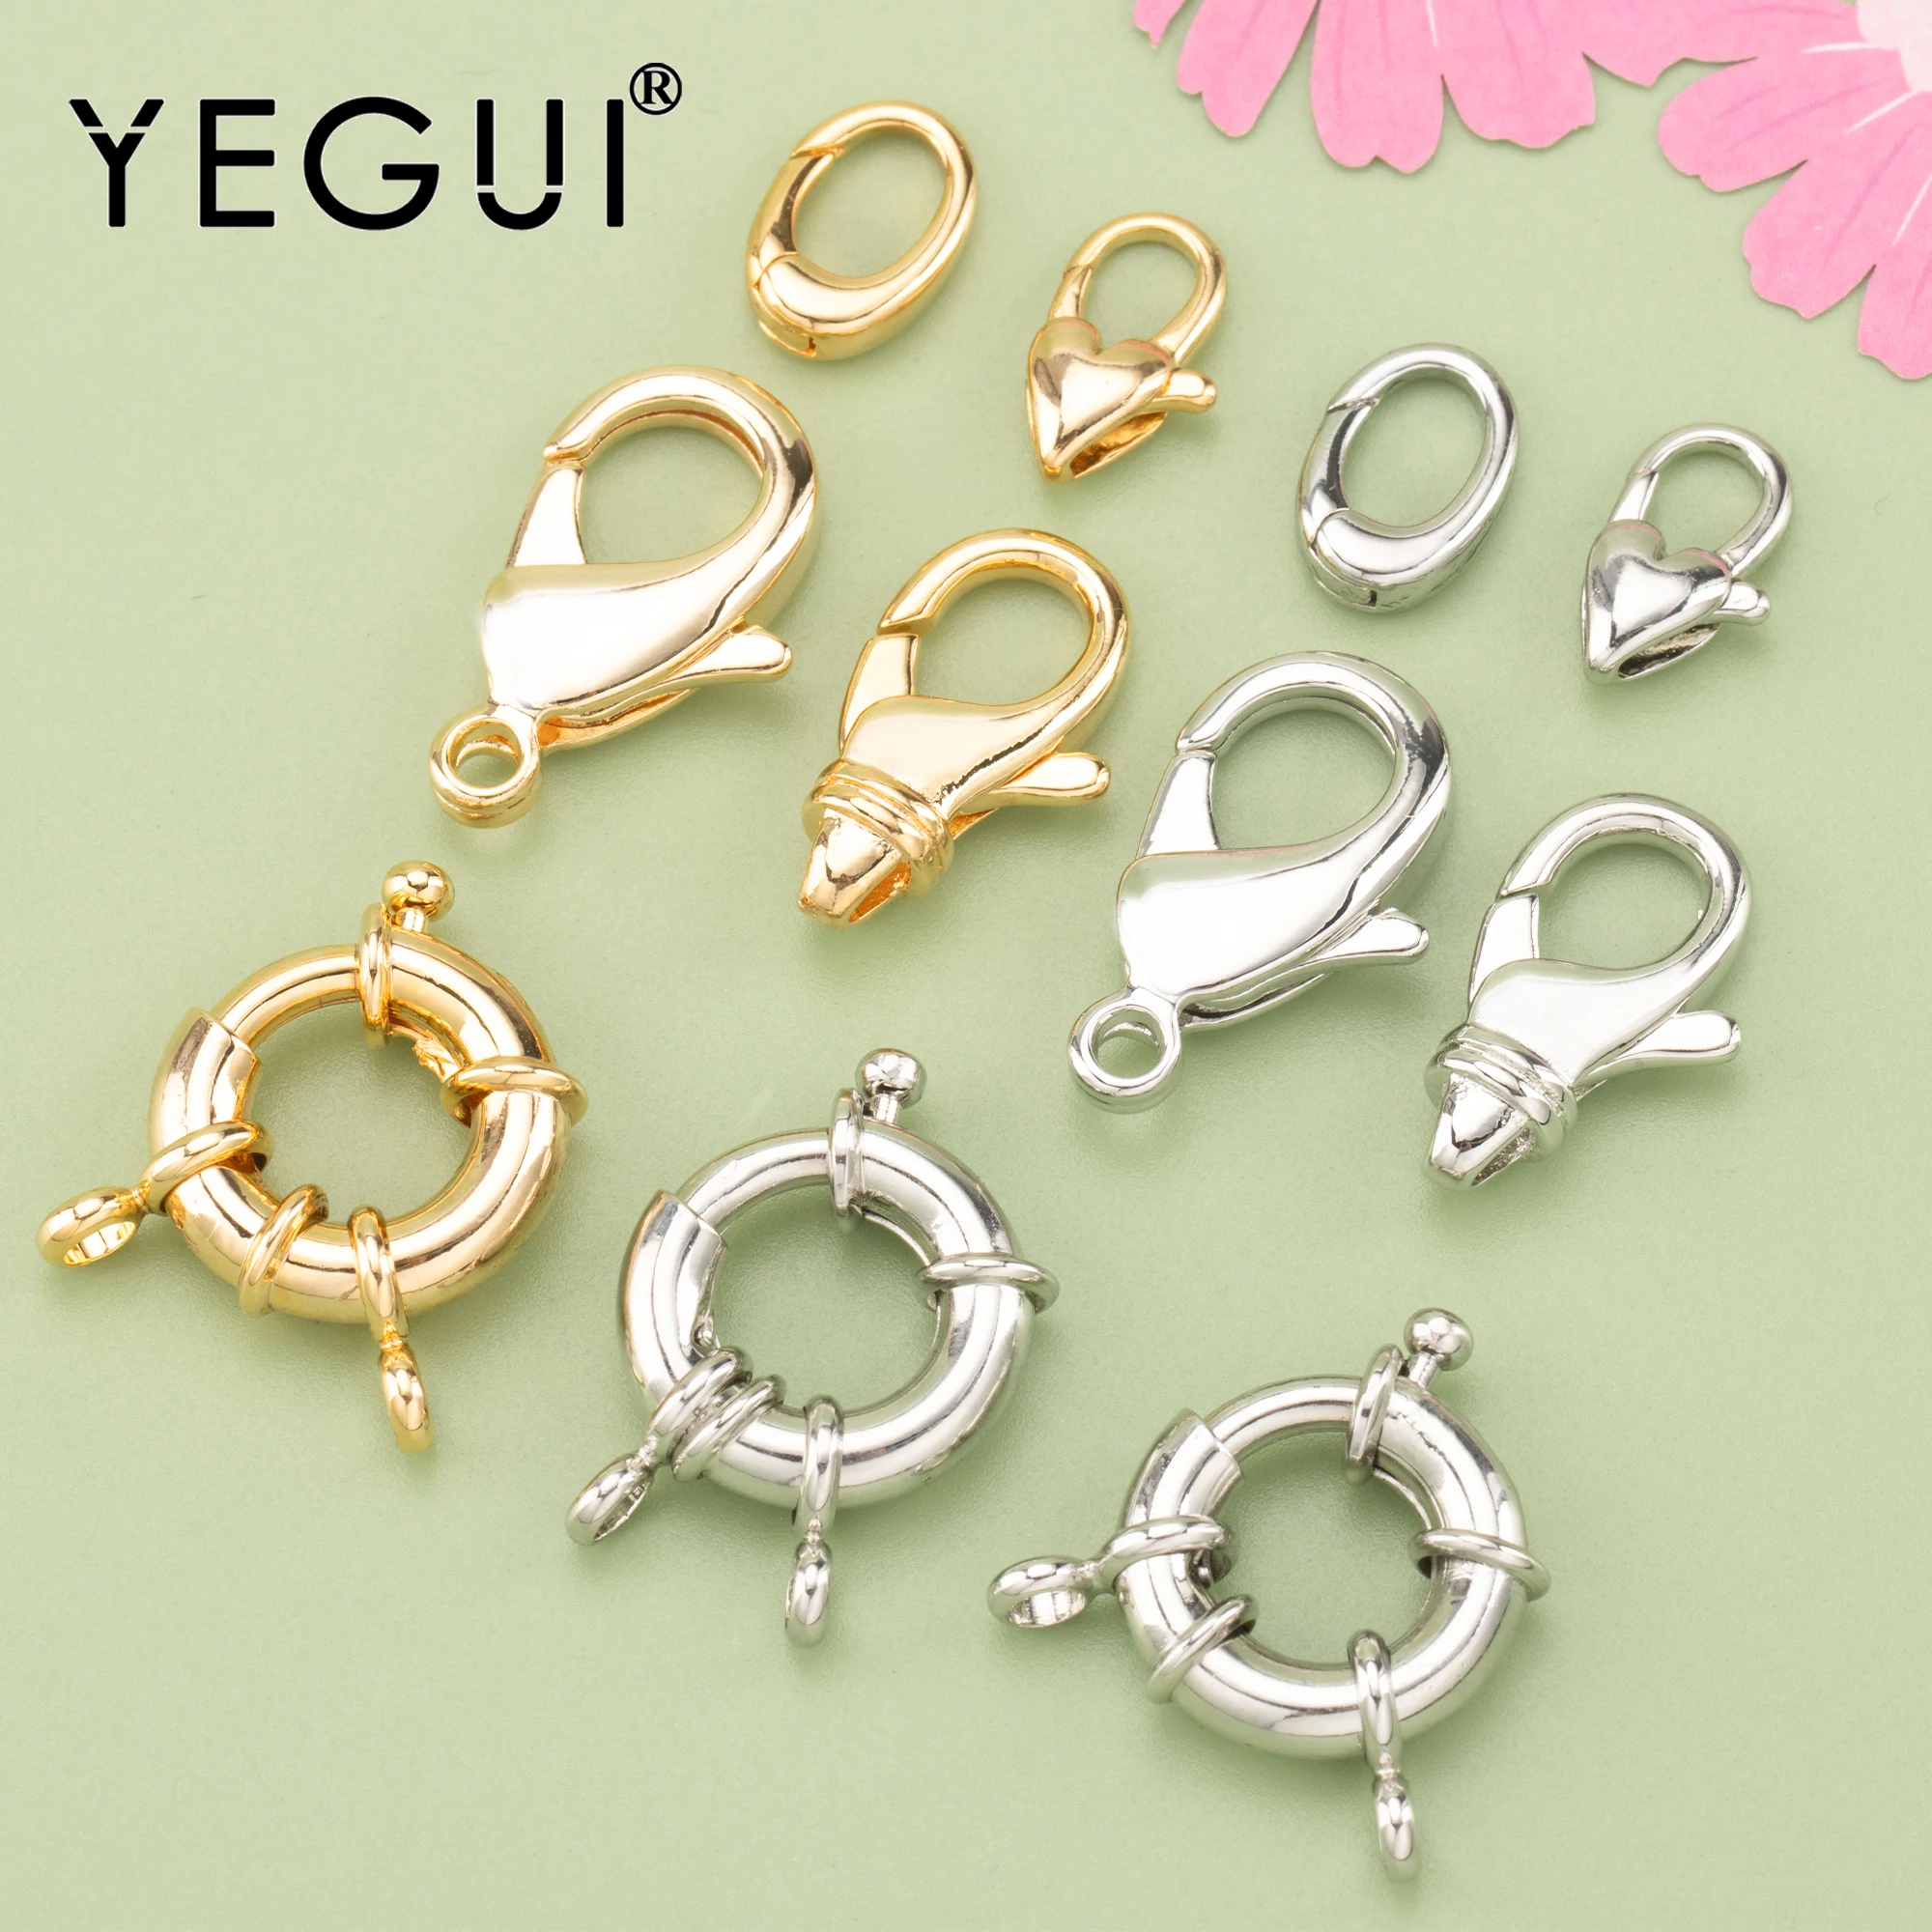 YEGUI M723,jewelry accessories,18k gold plated,0.3 microns,rhodium plated,connector,diy chain necklace,jewelry making,10pcs/lot